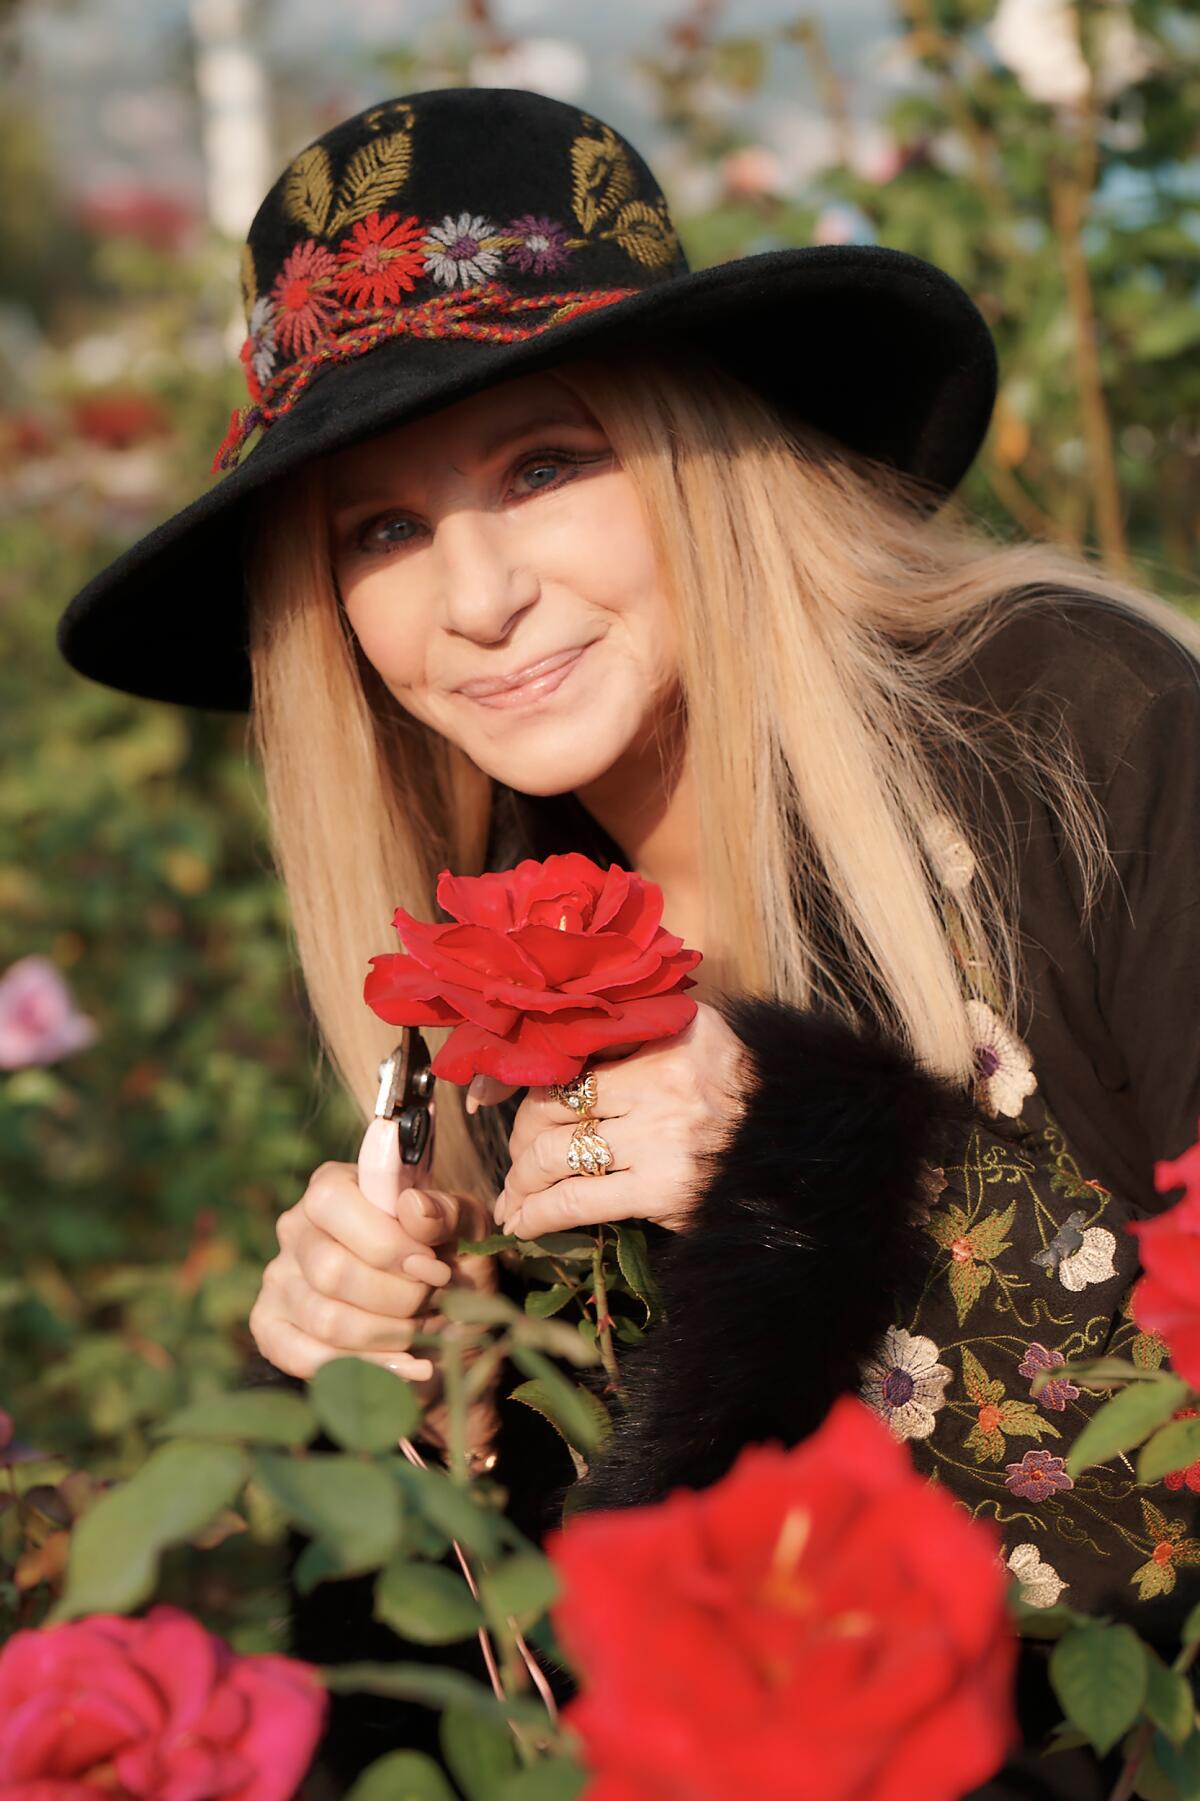 Barbra Streisand wears a floppy black hate and holds a colorful rose in a portrait.